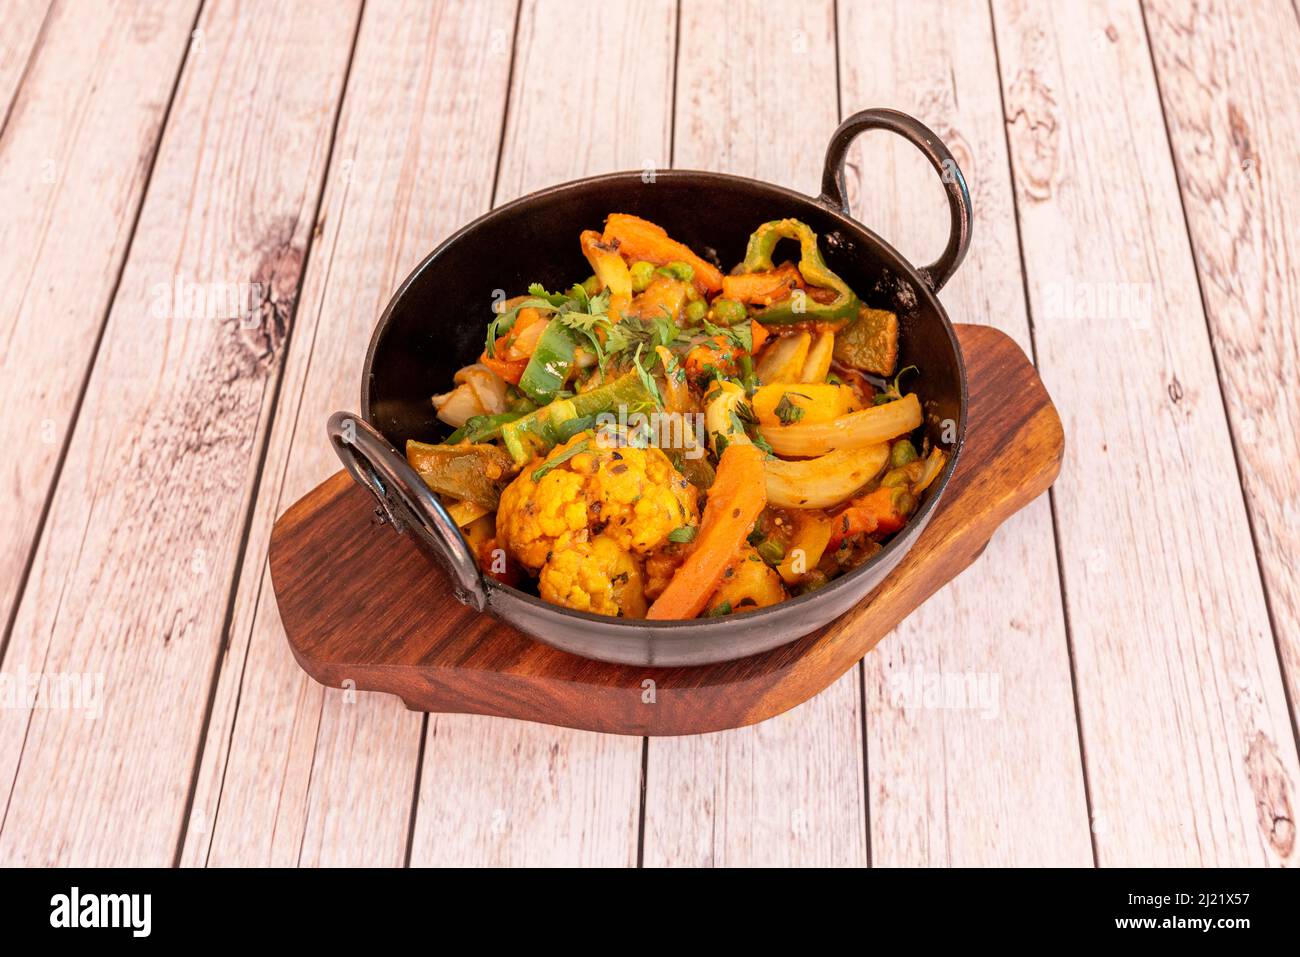 Vegetable jalfrezi is a popular Punjabi vegetable jalfrezi sabzi. vegetable jalfrezi features mixed vegetables cooked in a tomato base Stock Photo